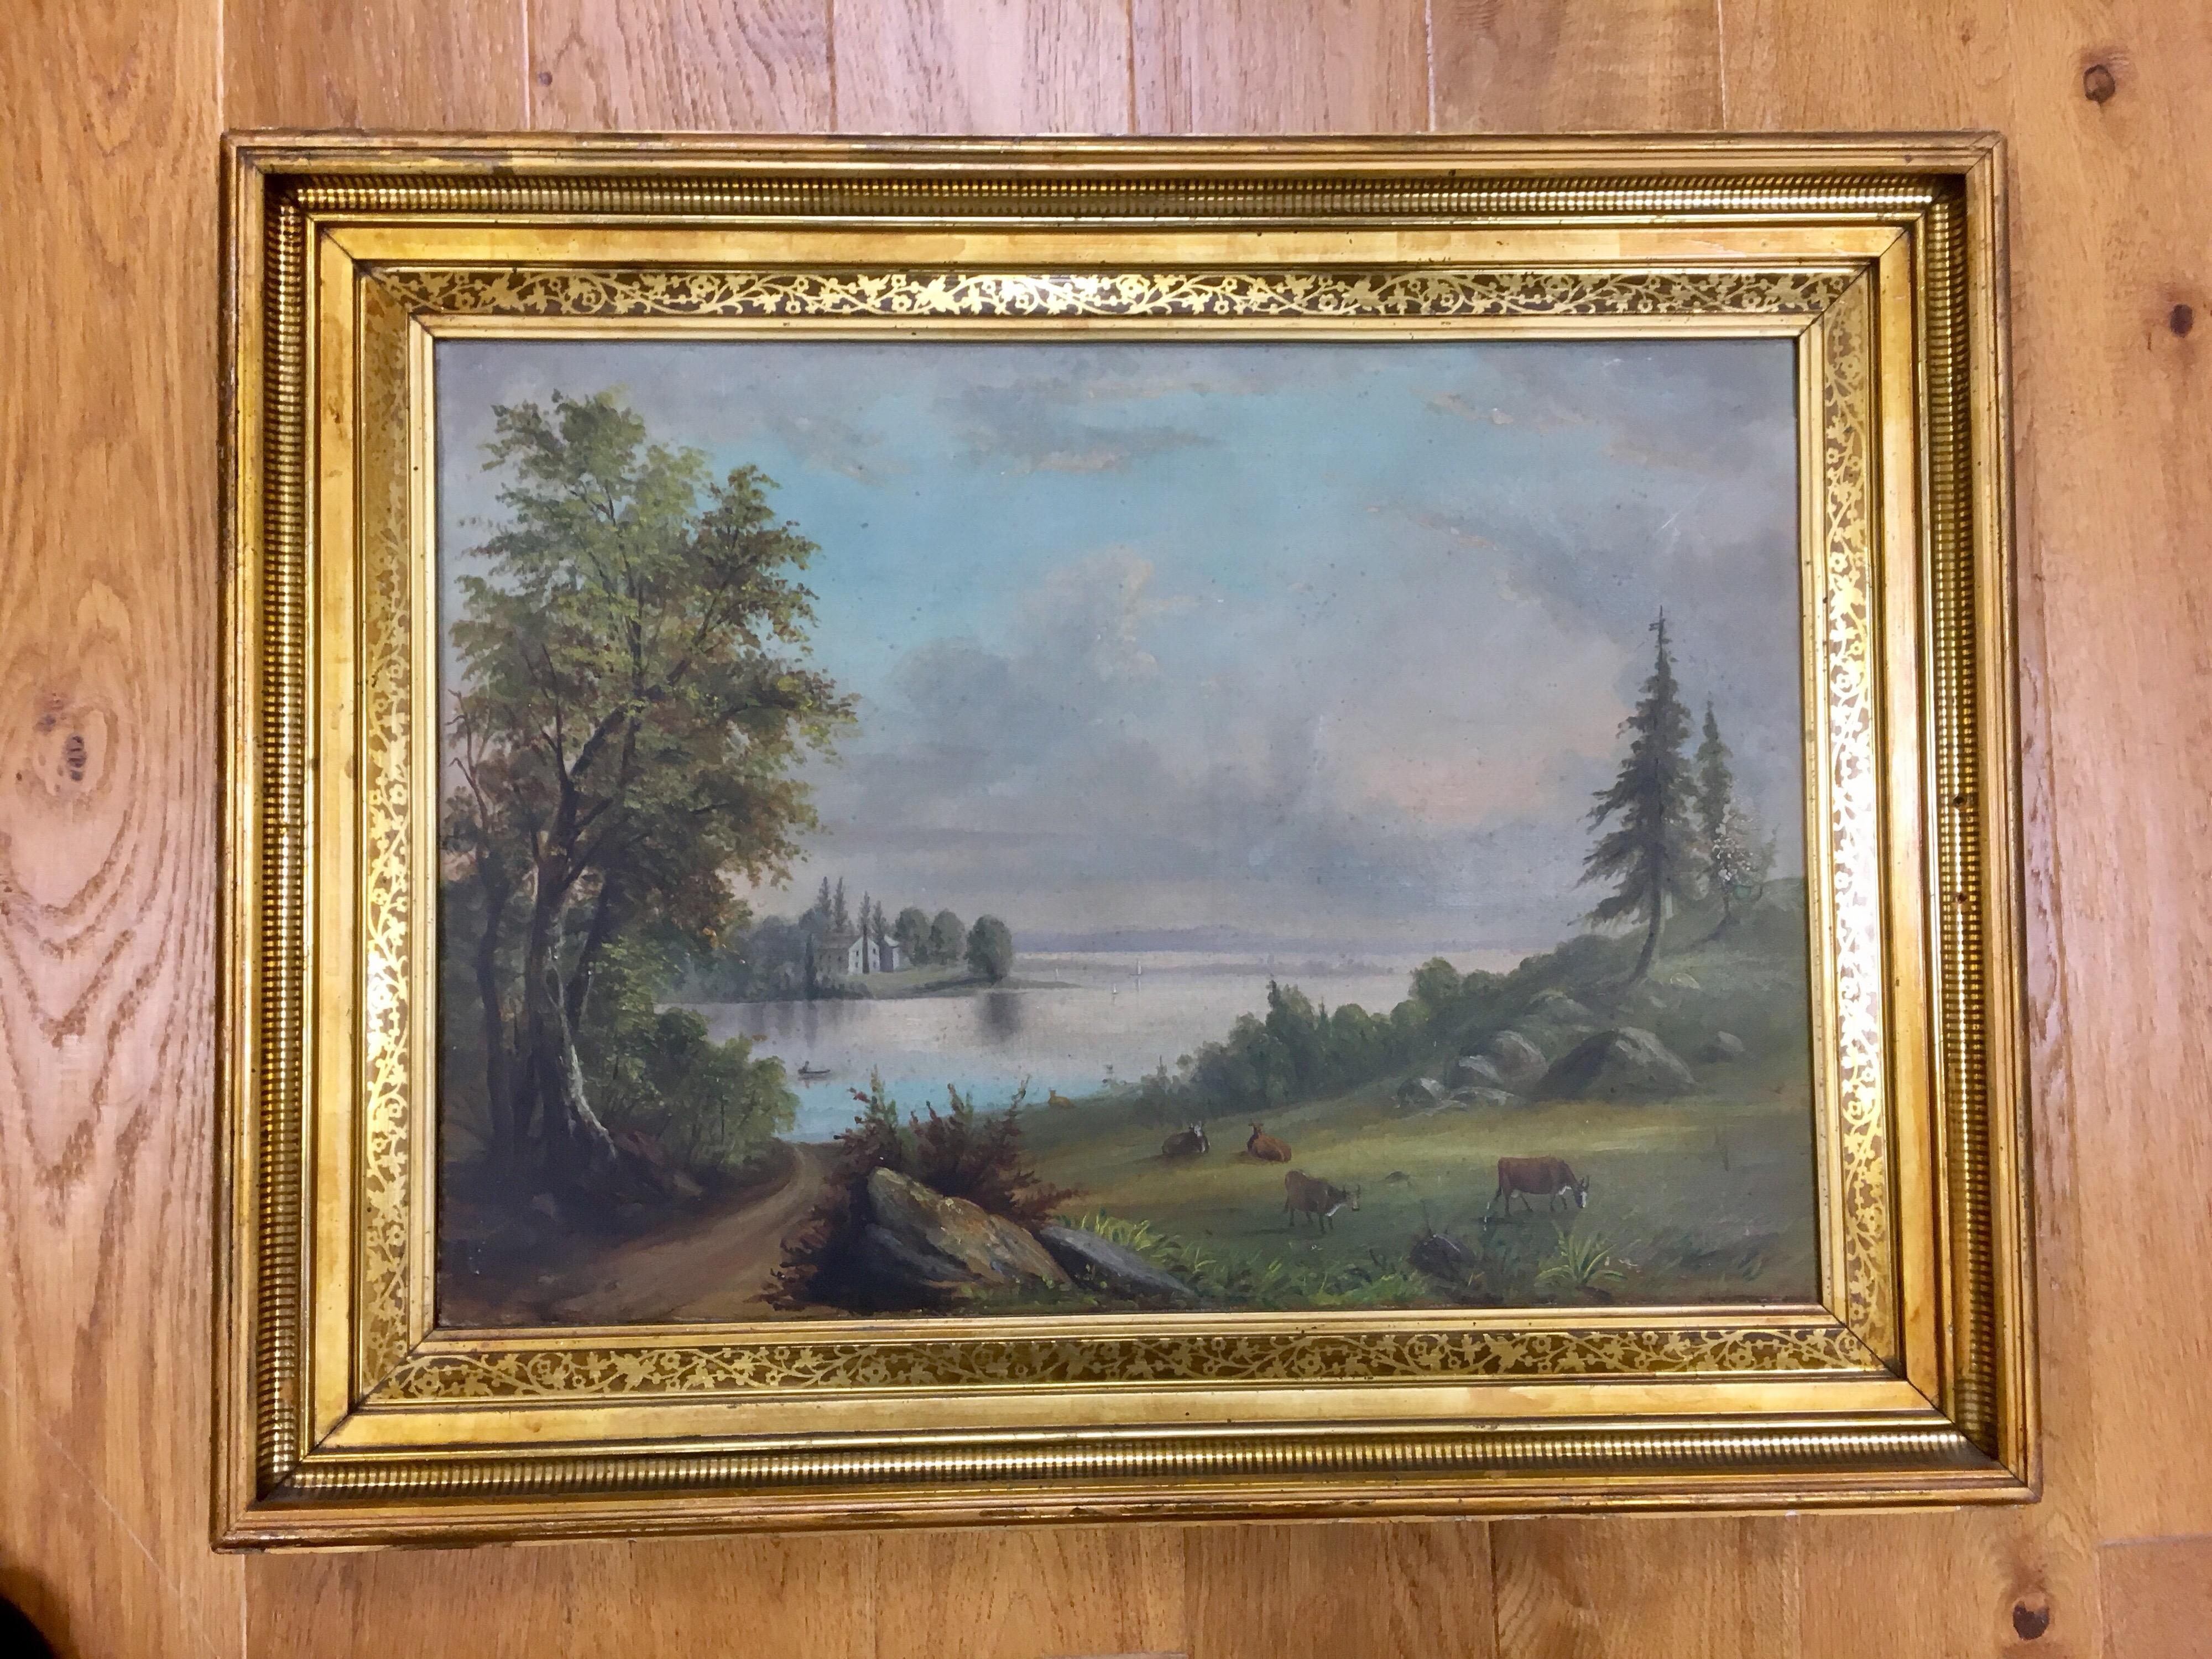 Original oil painting in original frame with no signature by the artist that we can see, circa 1920s.